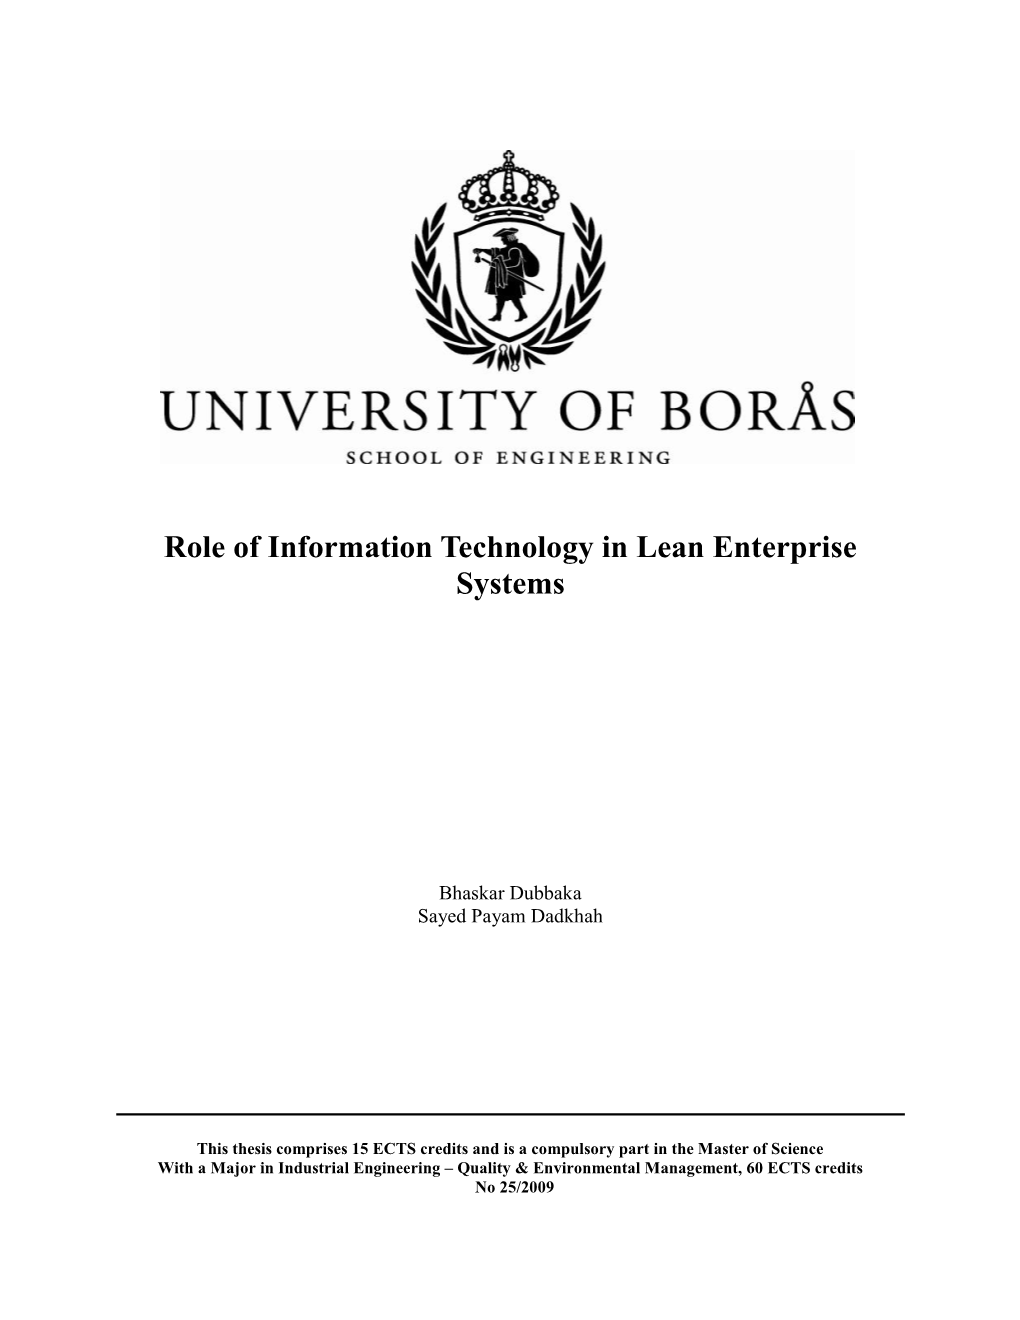 Role of Information Technology in Lean Enterprise Systems